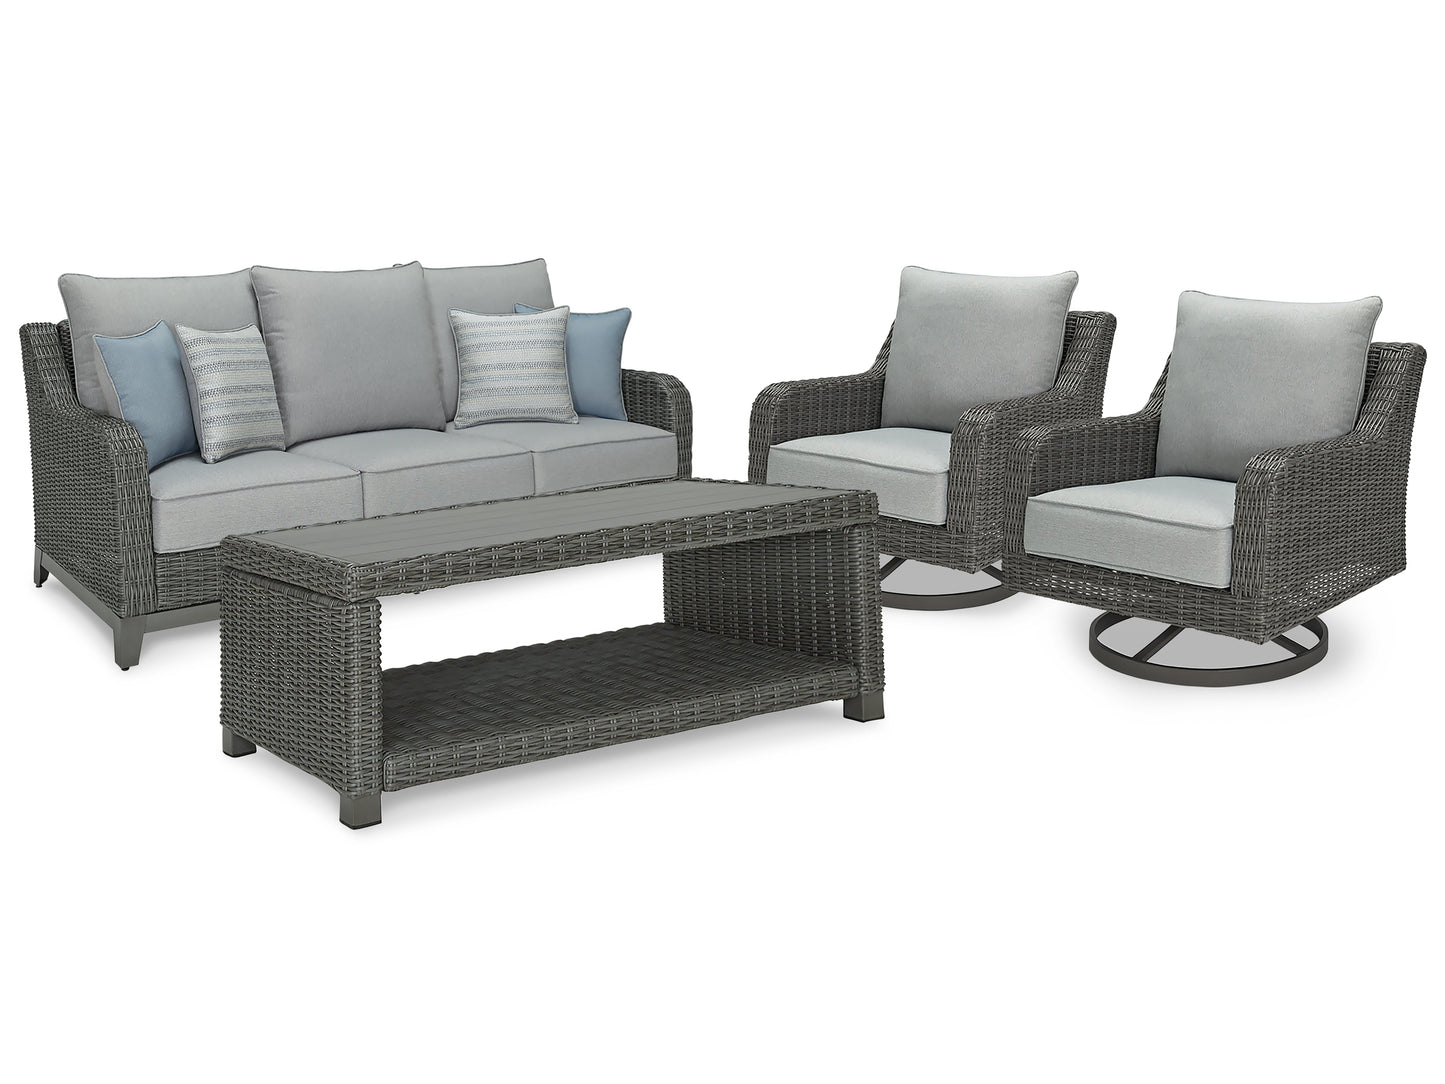 Elite Park Gray Outdoor Sofa, 2 Lounge Chairs and Coffee Table